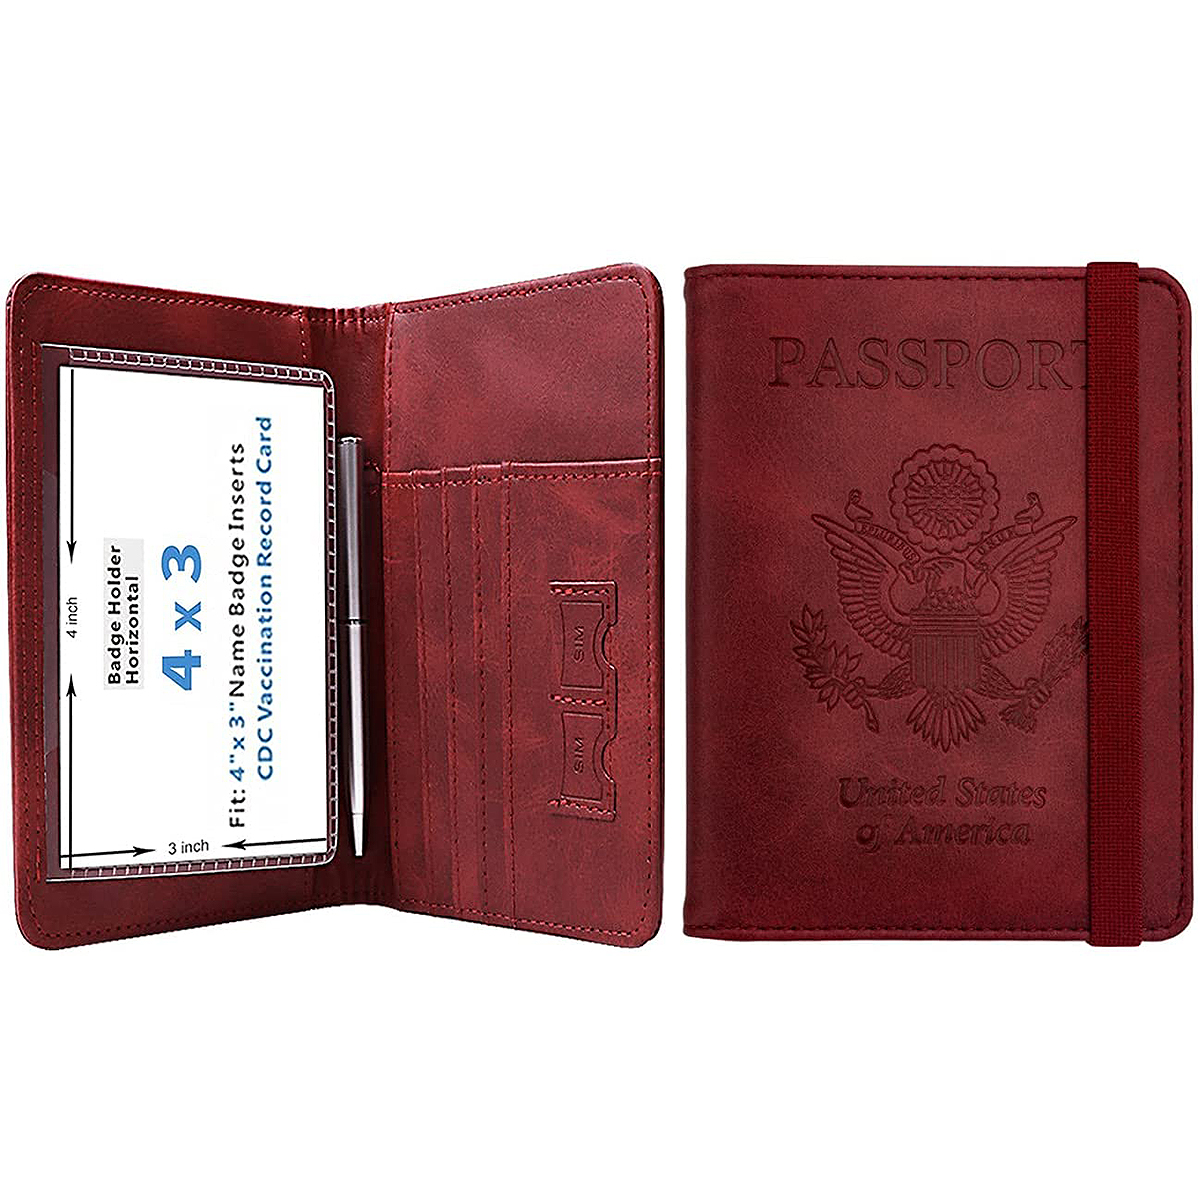 Access Denied CDC Vaccination Card Holder Genuine Leather Vaccine Card Protector with Credit Cards Wallets for Men & Women RFID Blocking, Adult Unisex